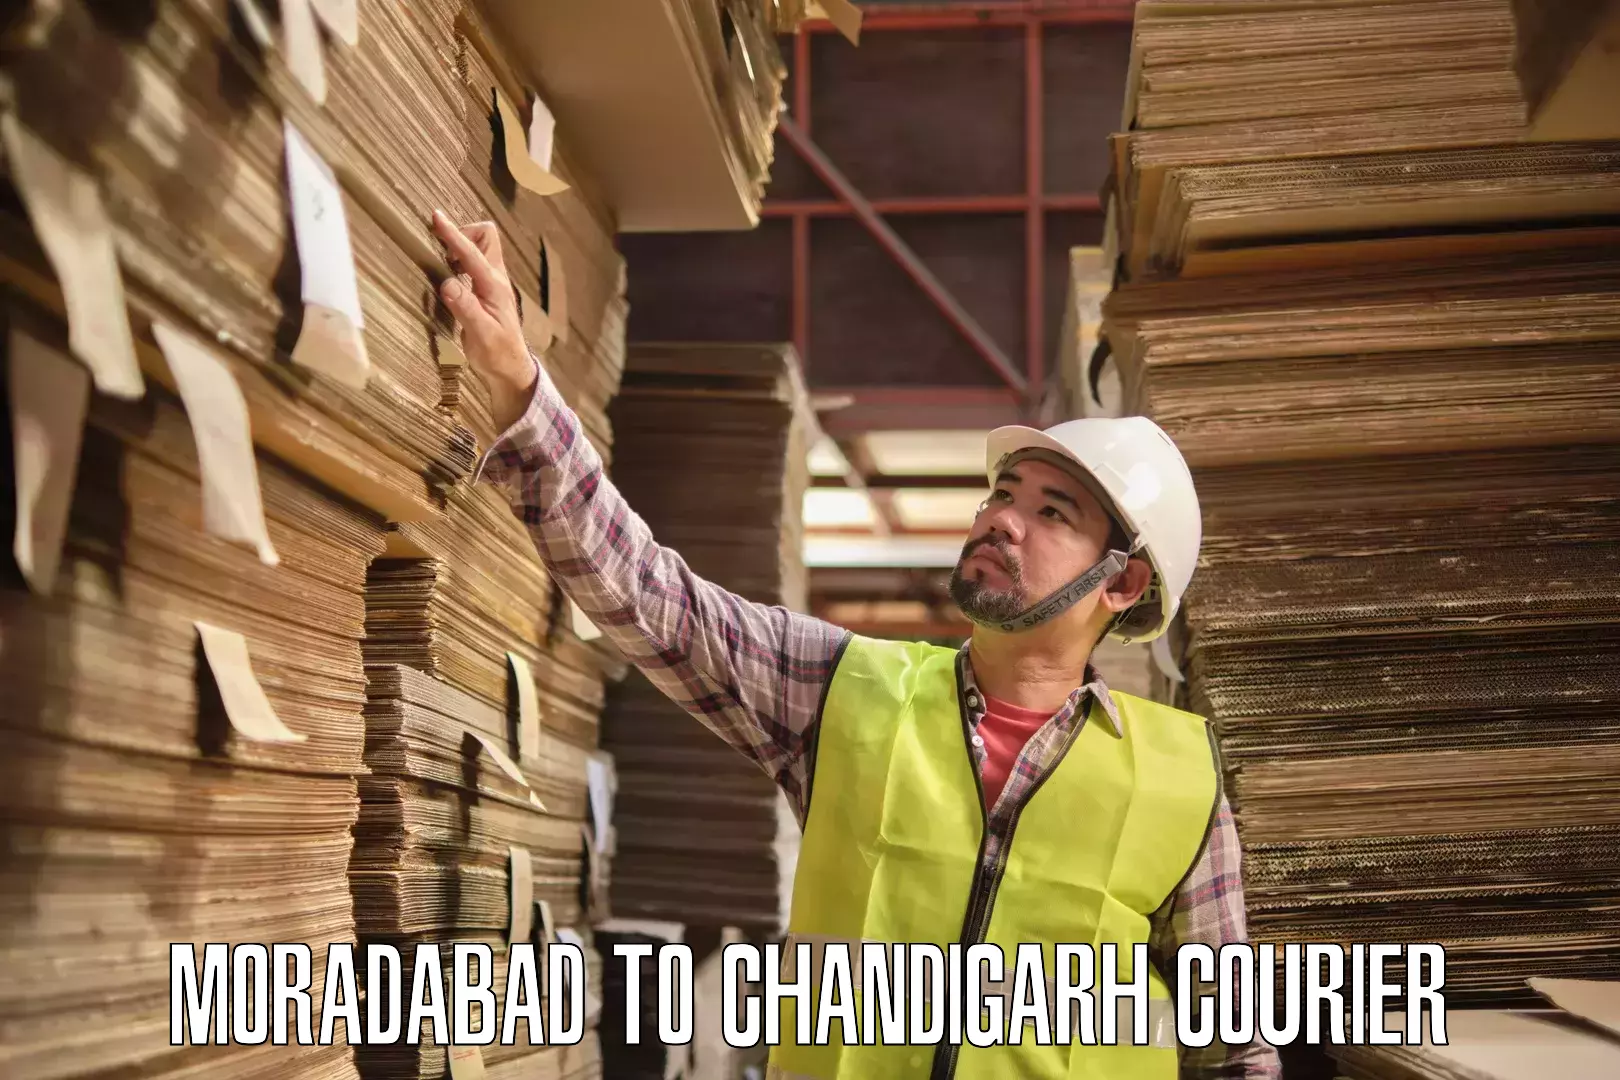 Multi-national courier services Moradabad to Chandigarh